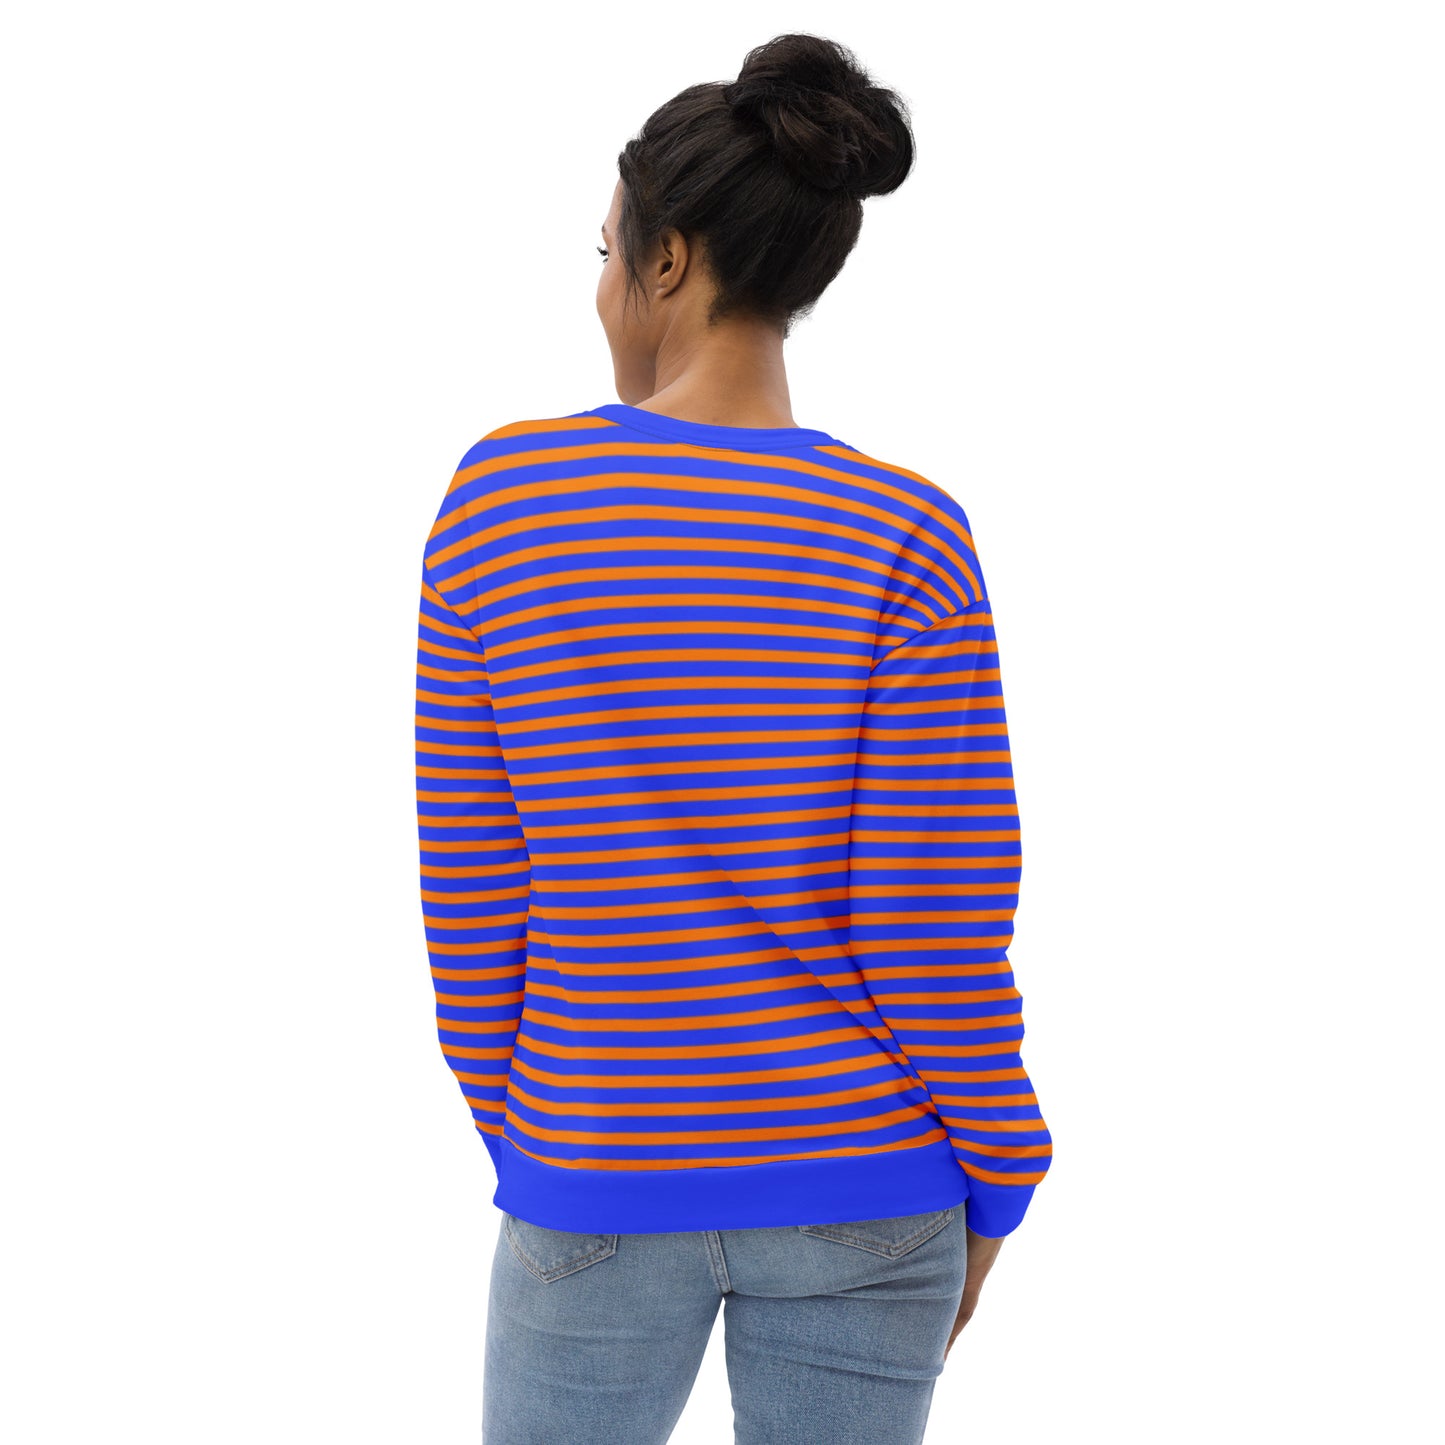 Striped Sweater: Blue and Orange Stripes for a Bold and Eye-Catching Look